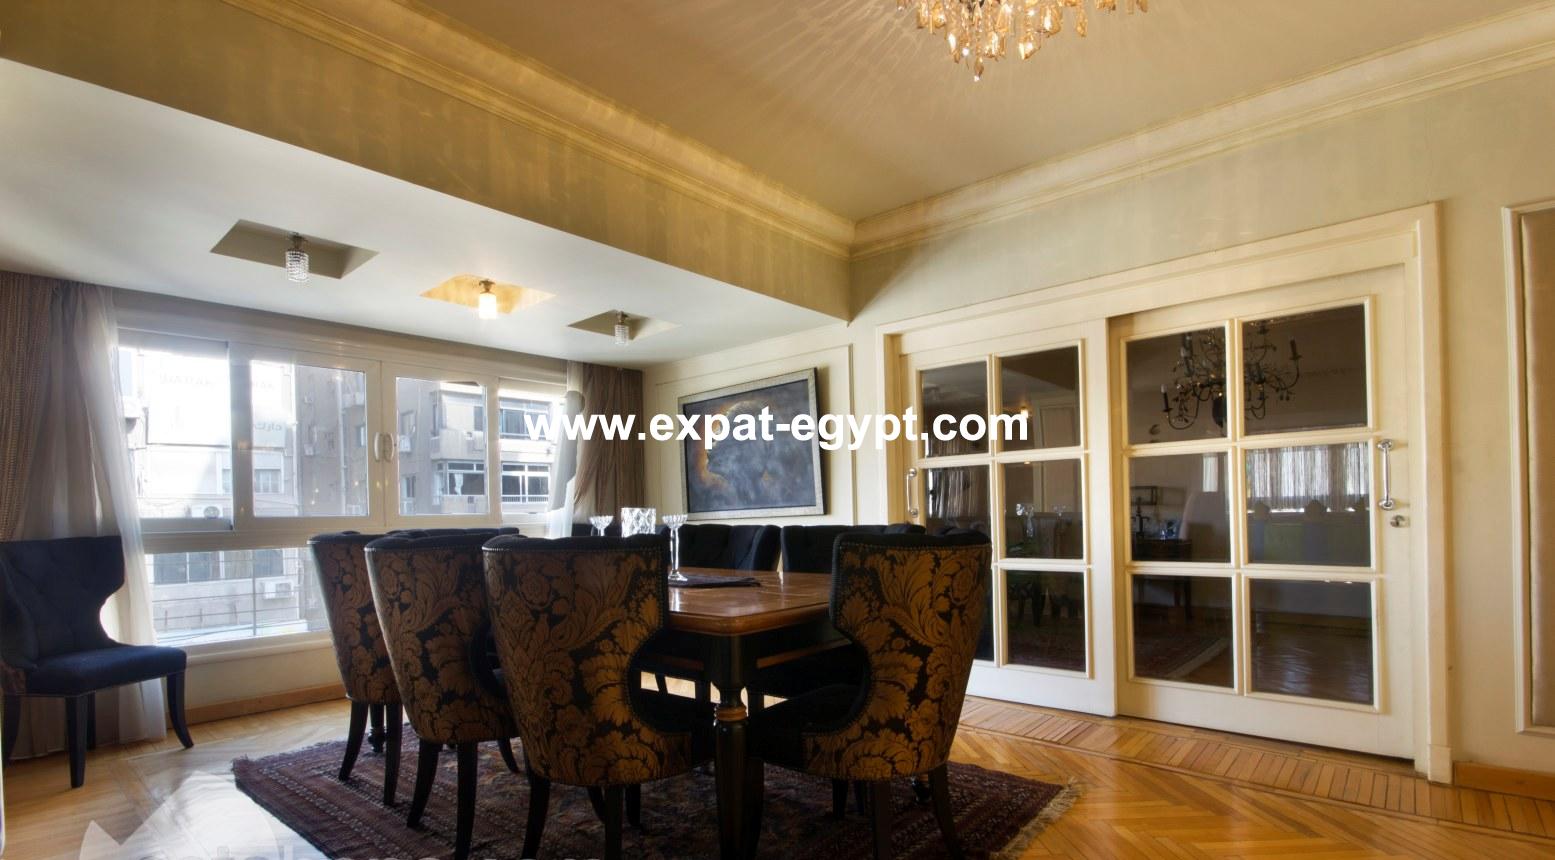  Apartment for sale  in Mohandessen , Giza , Egypt 